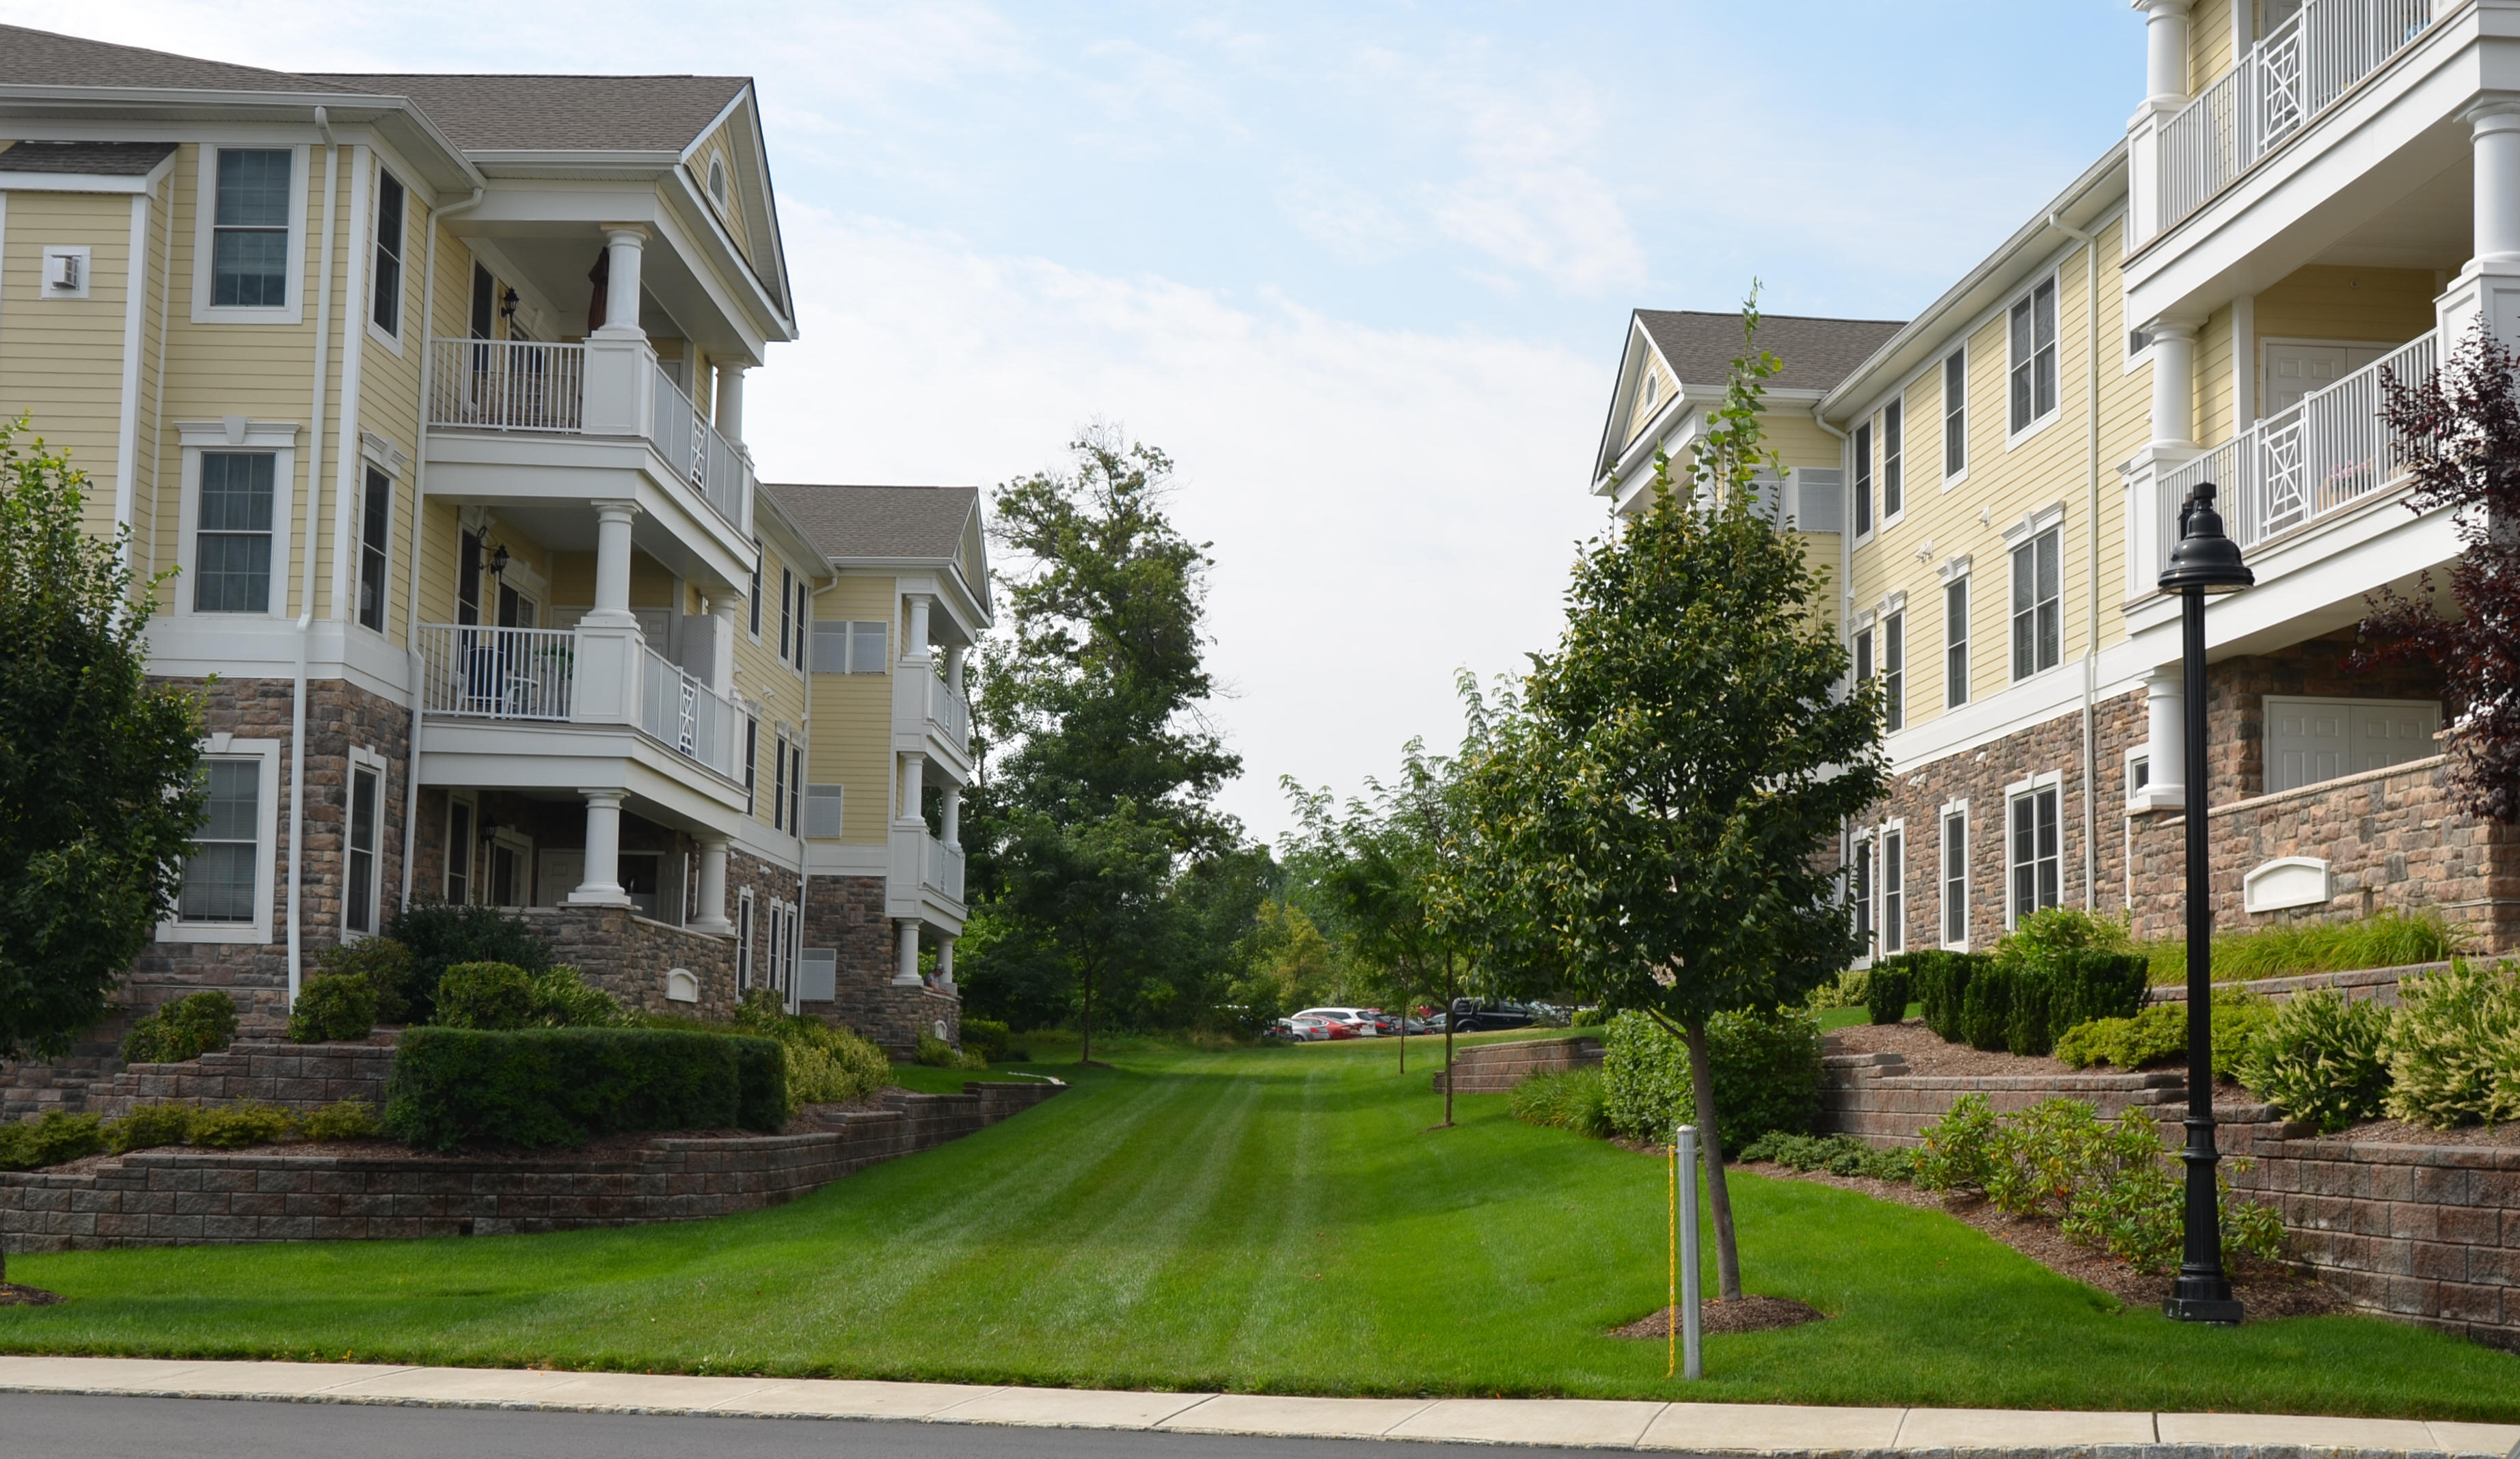 Four Seasons At Ridgemont Montvale Woodcliff Lake Bergen County Nj Luxury Townhomes For Sale Or Rent